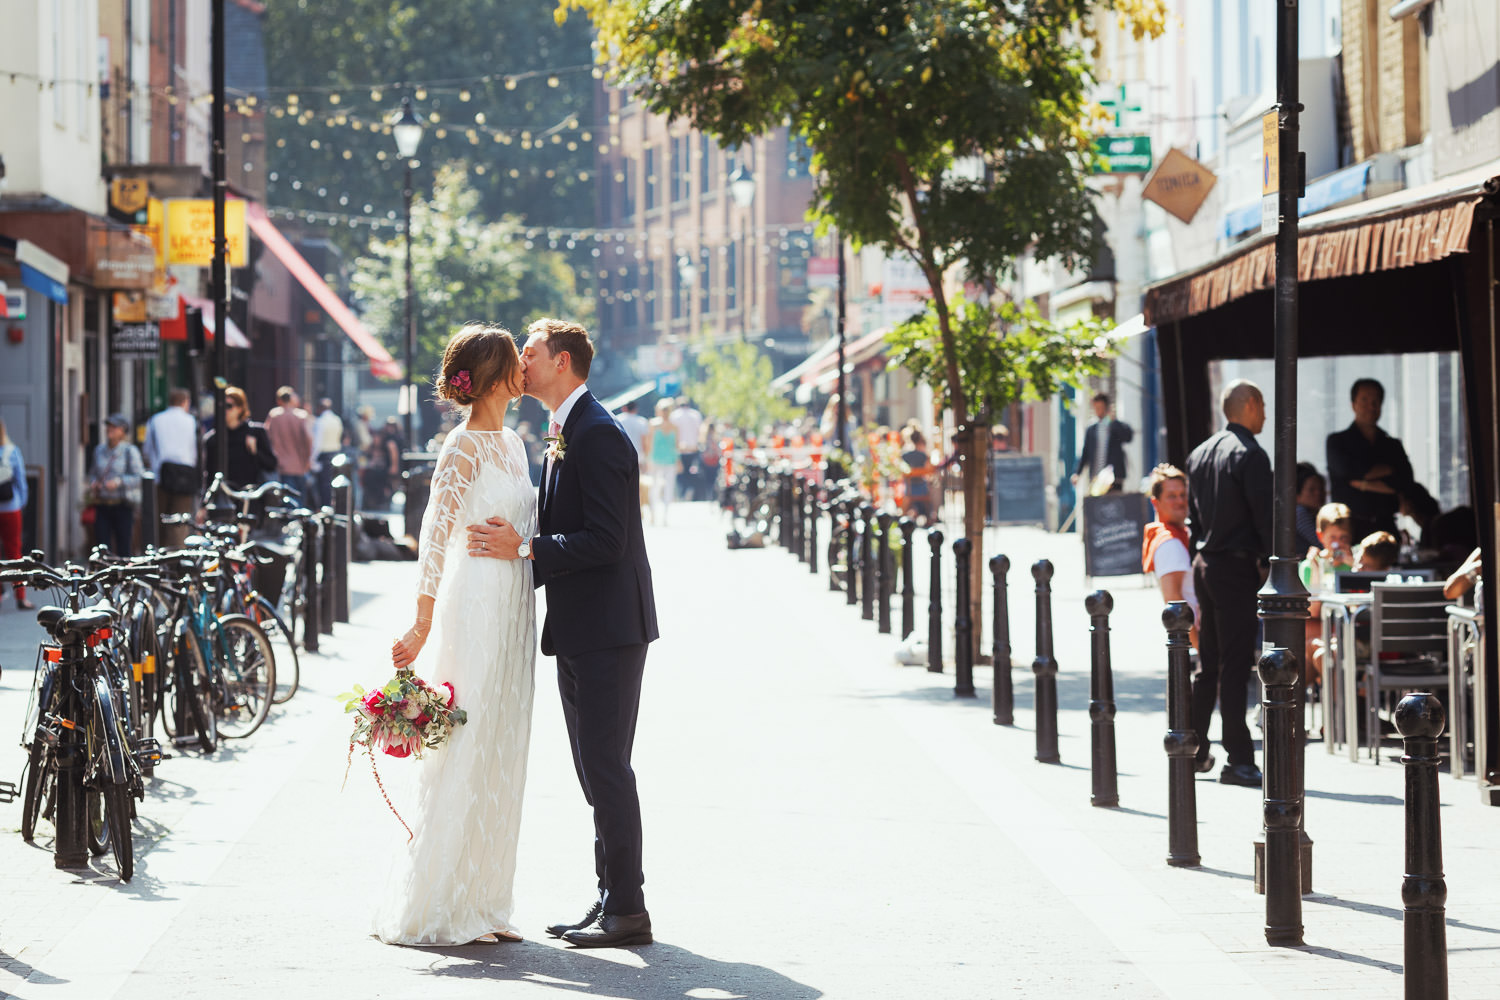 Couple posing for a portrait kiss in the Exmouth Market on their wedding day. A random stranger is smiling at them after congratulating them. Then they kiss. The bride is wearing the Willow Halfpenny dress.